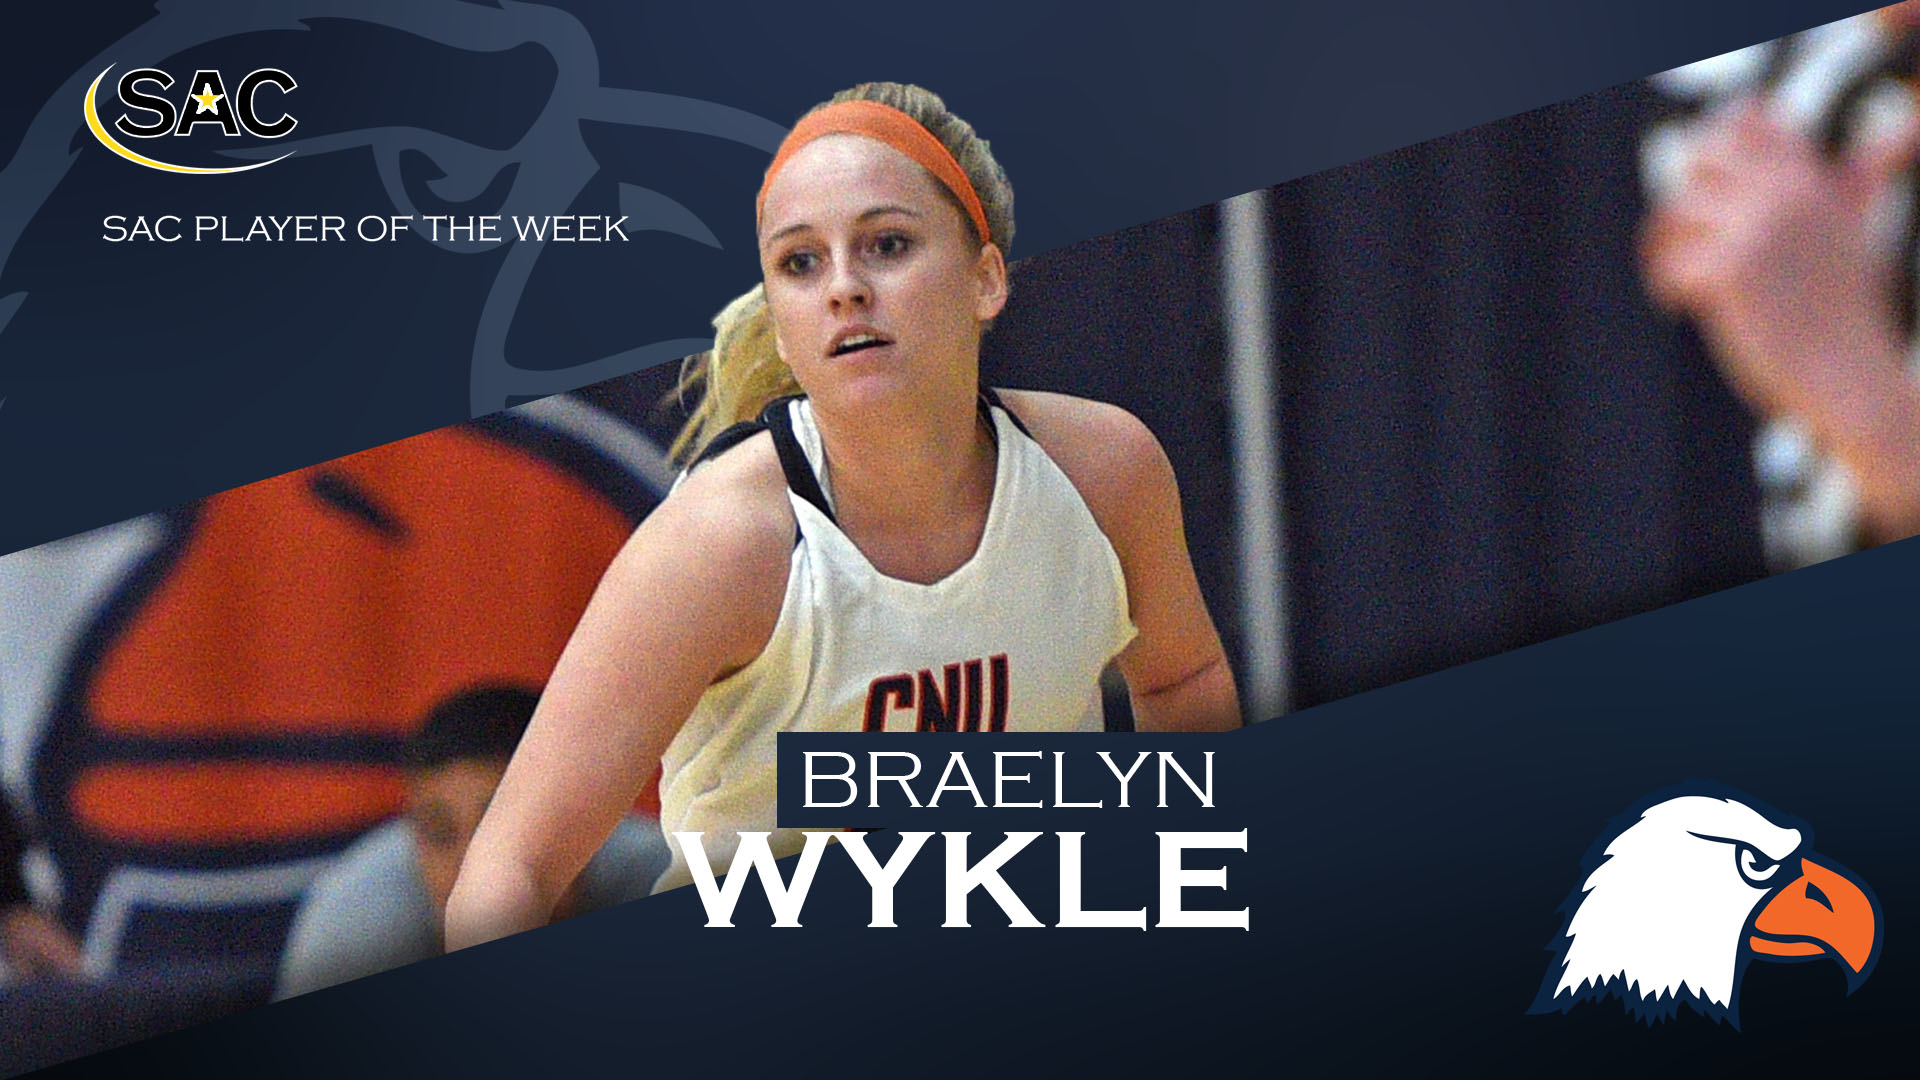 Wykle nets SAC Player of the Week